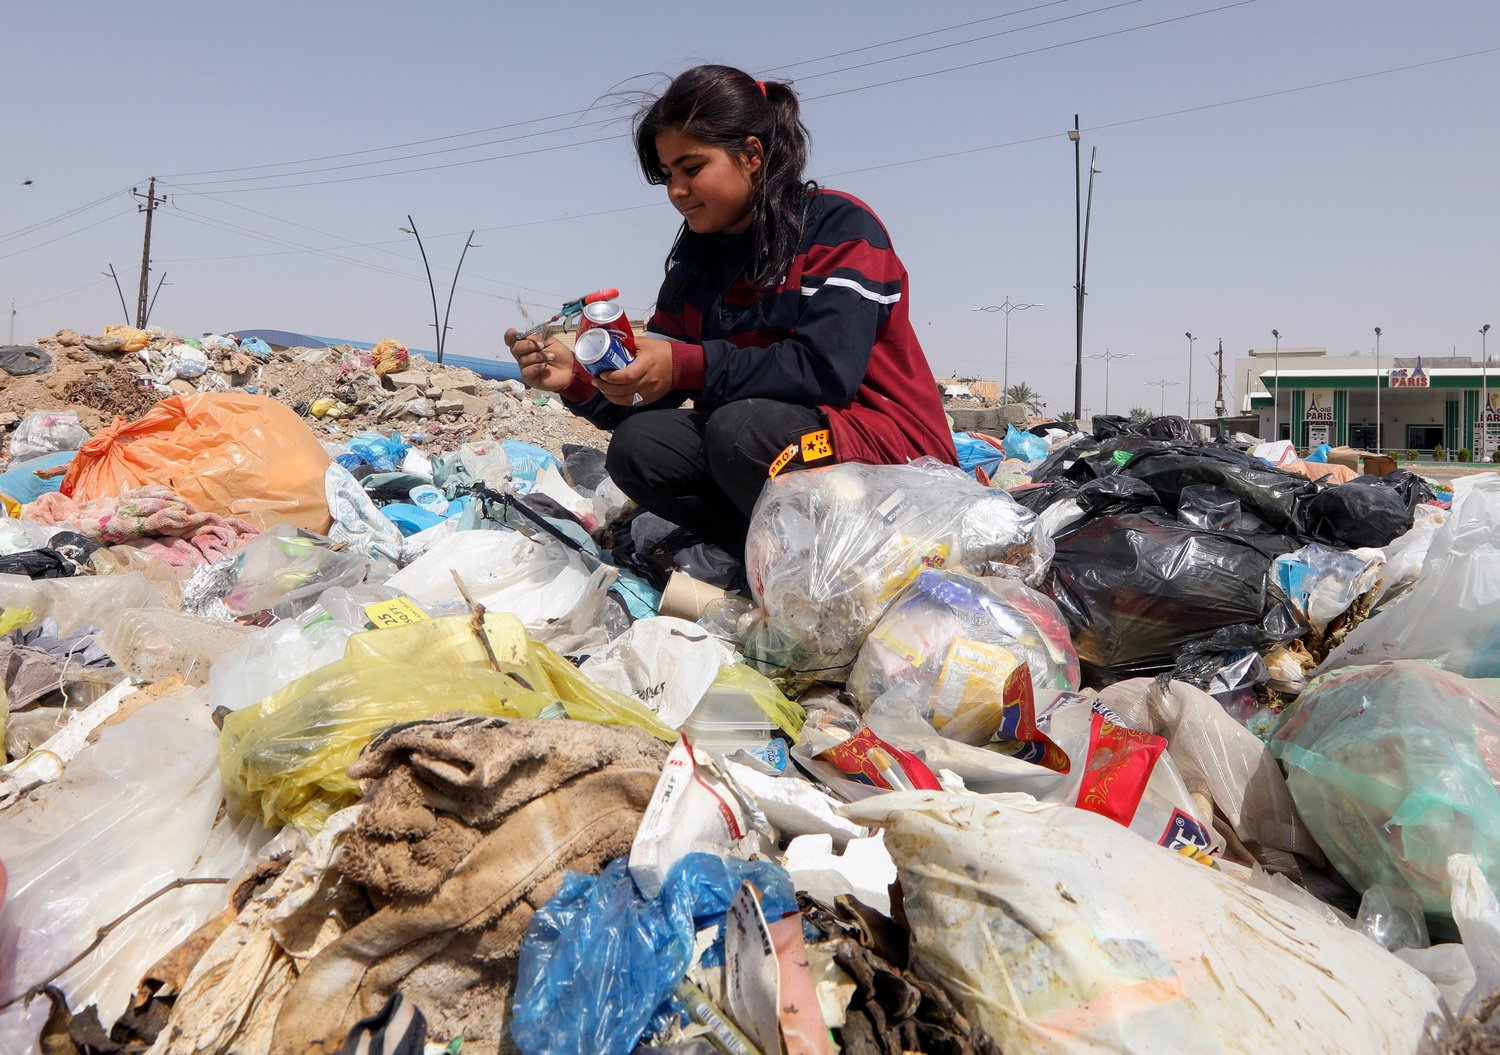 Sahar Shaaban, 11, an Iraqi girl who provides for her family, collects cans from a garbage area in Kirkuk, Iraq, April 21, 2021.